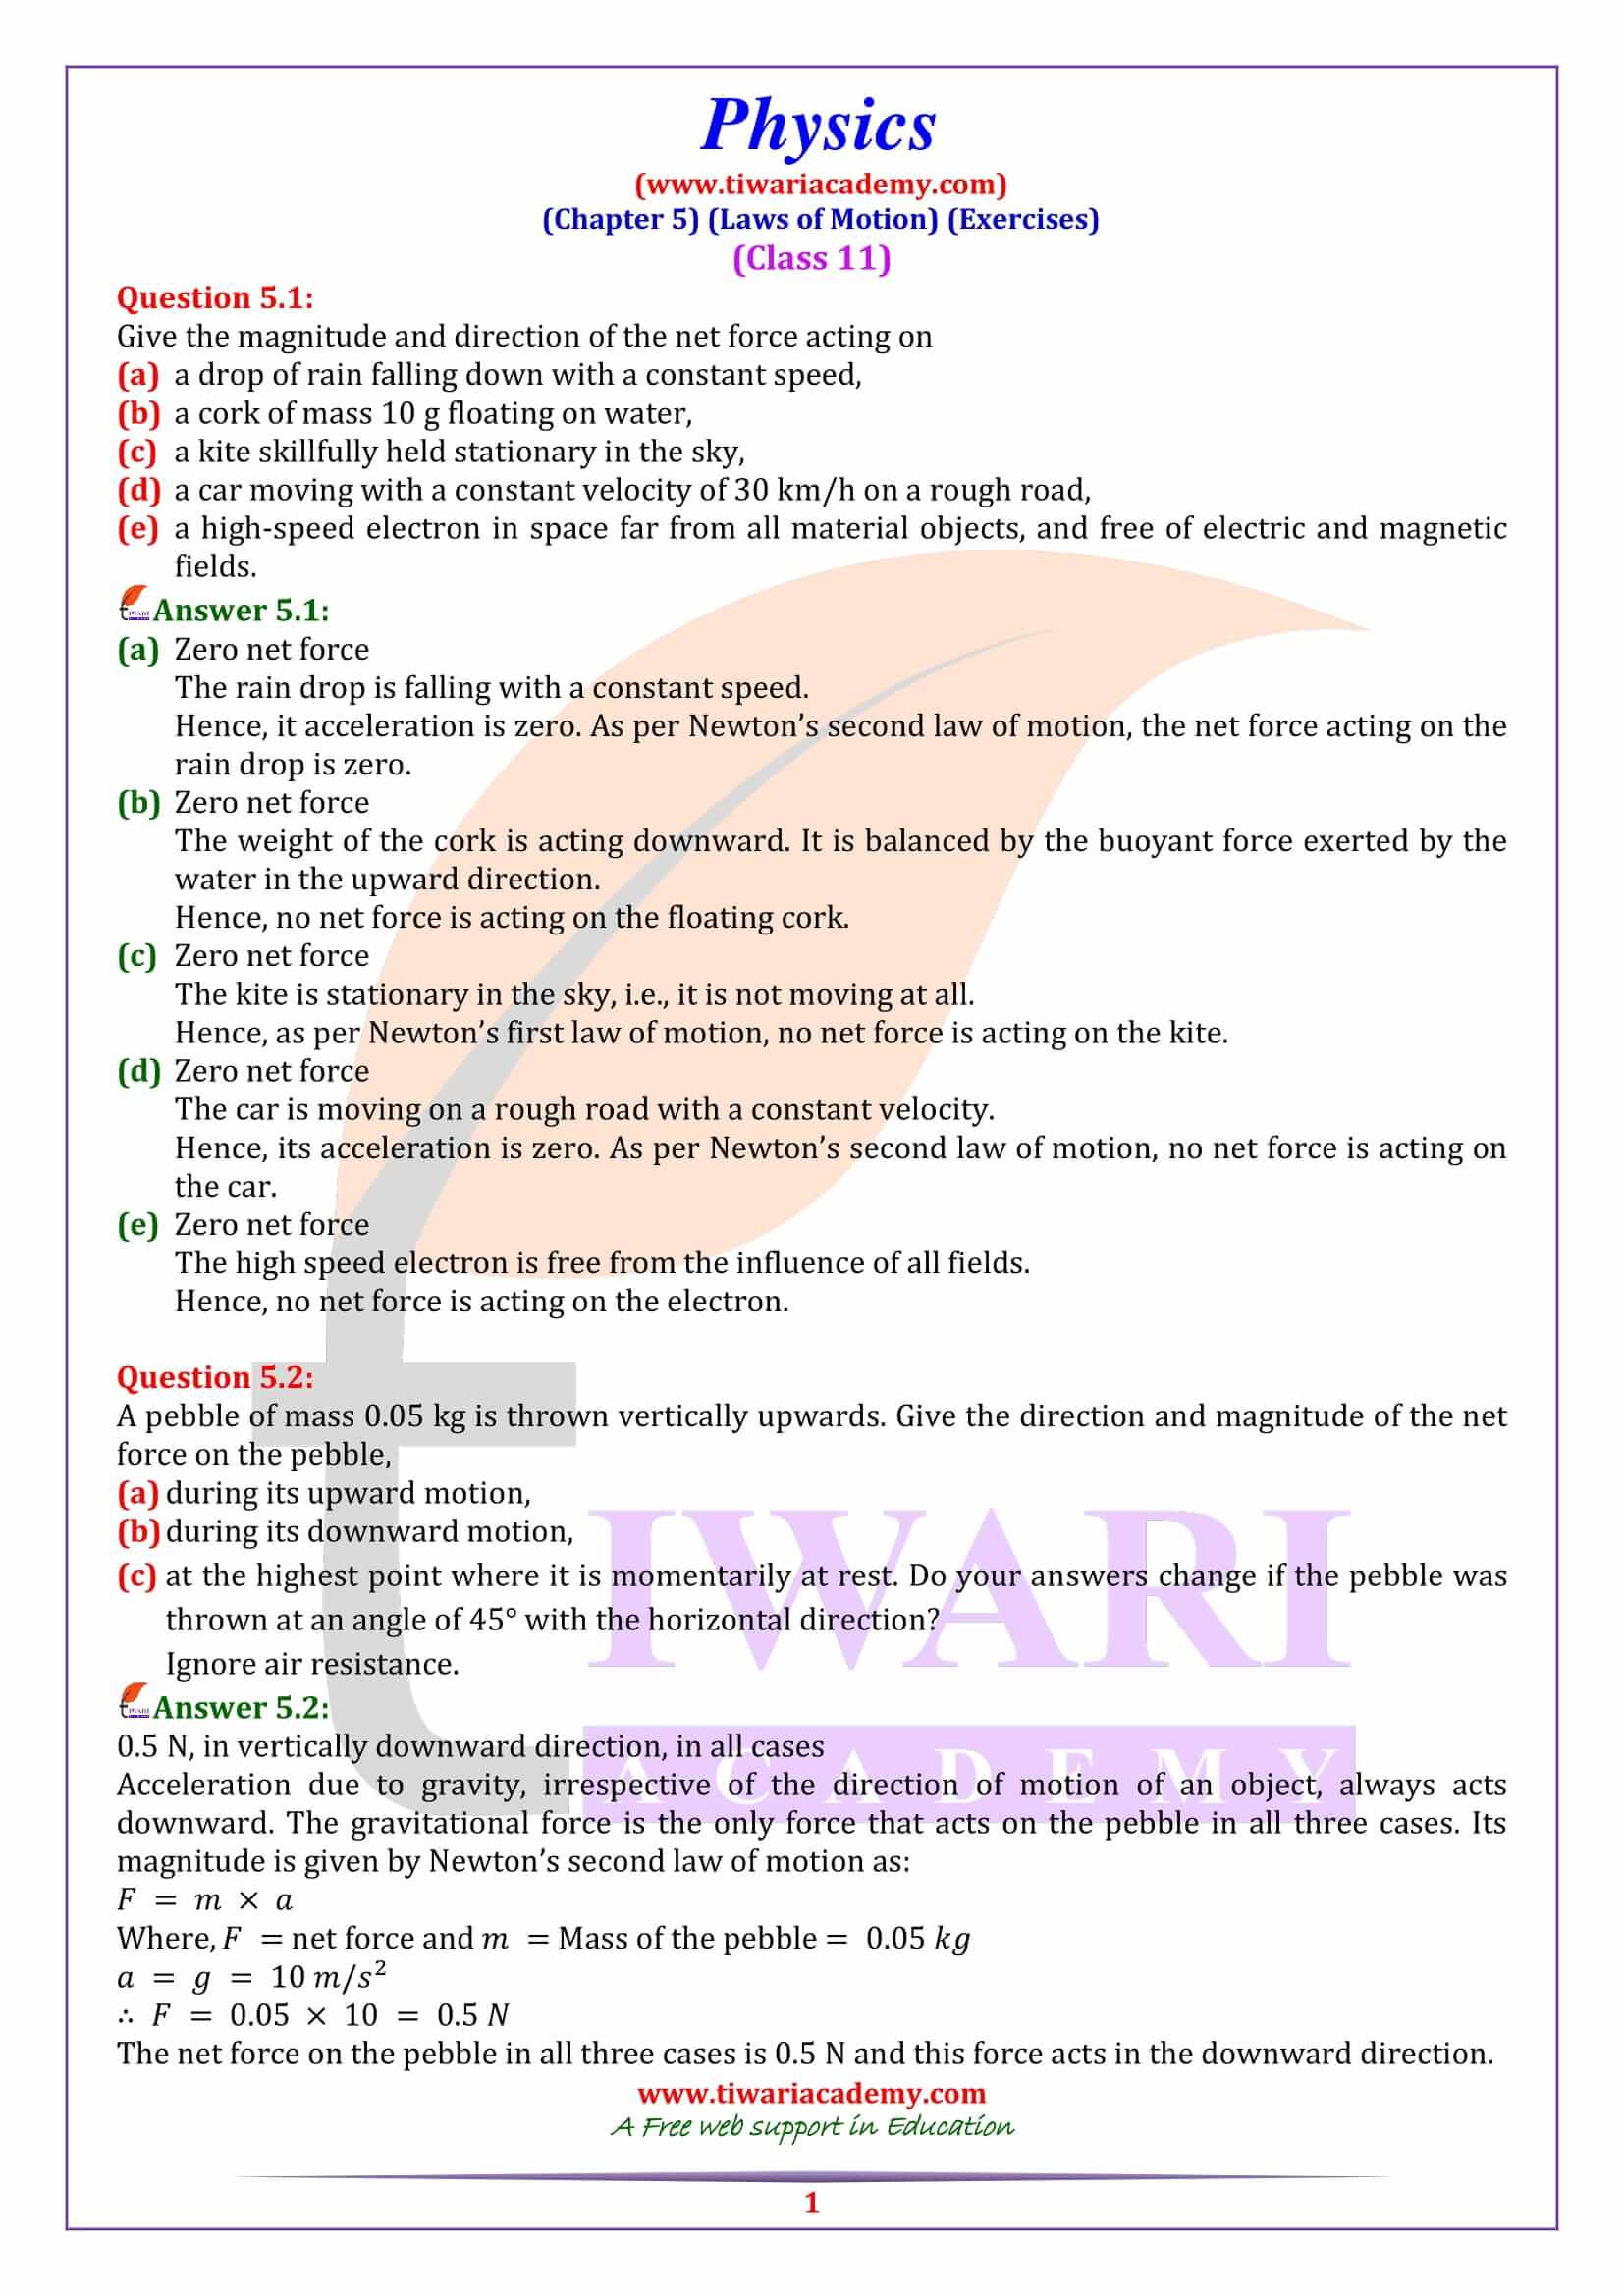 NCERT Solutions for Class 11 Physics Chapter 5 Exercises